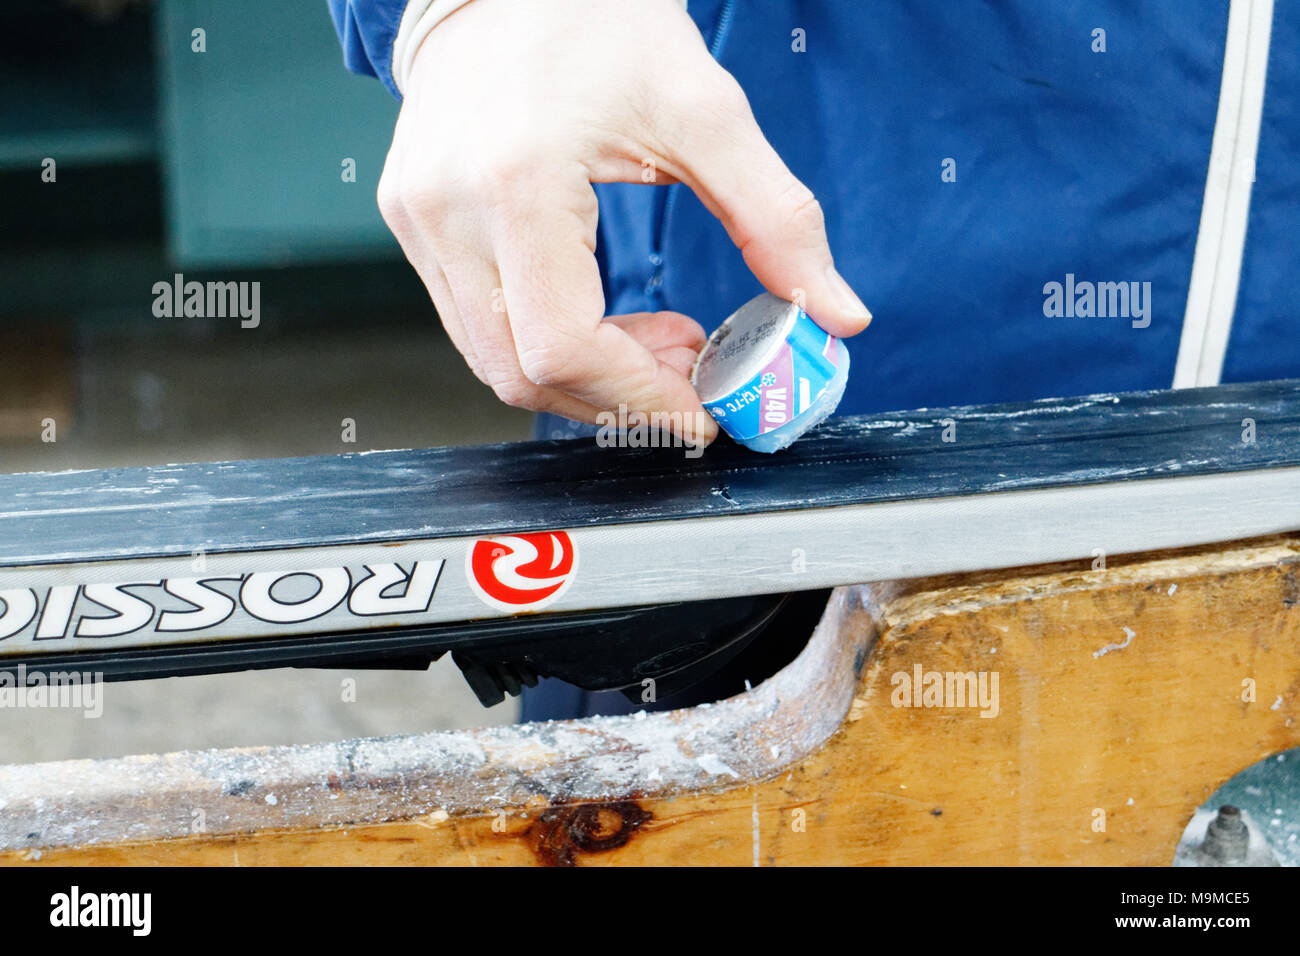 A woman waxing cross country skis before going out ski-ing Stock Photo